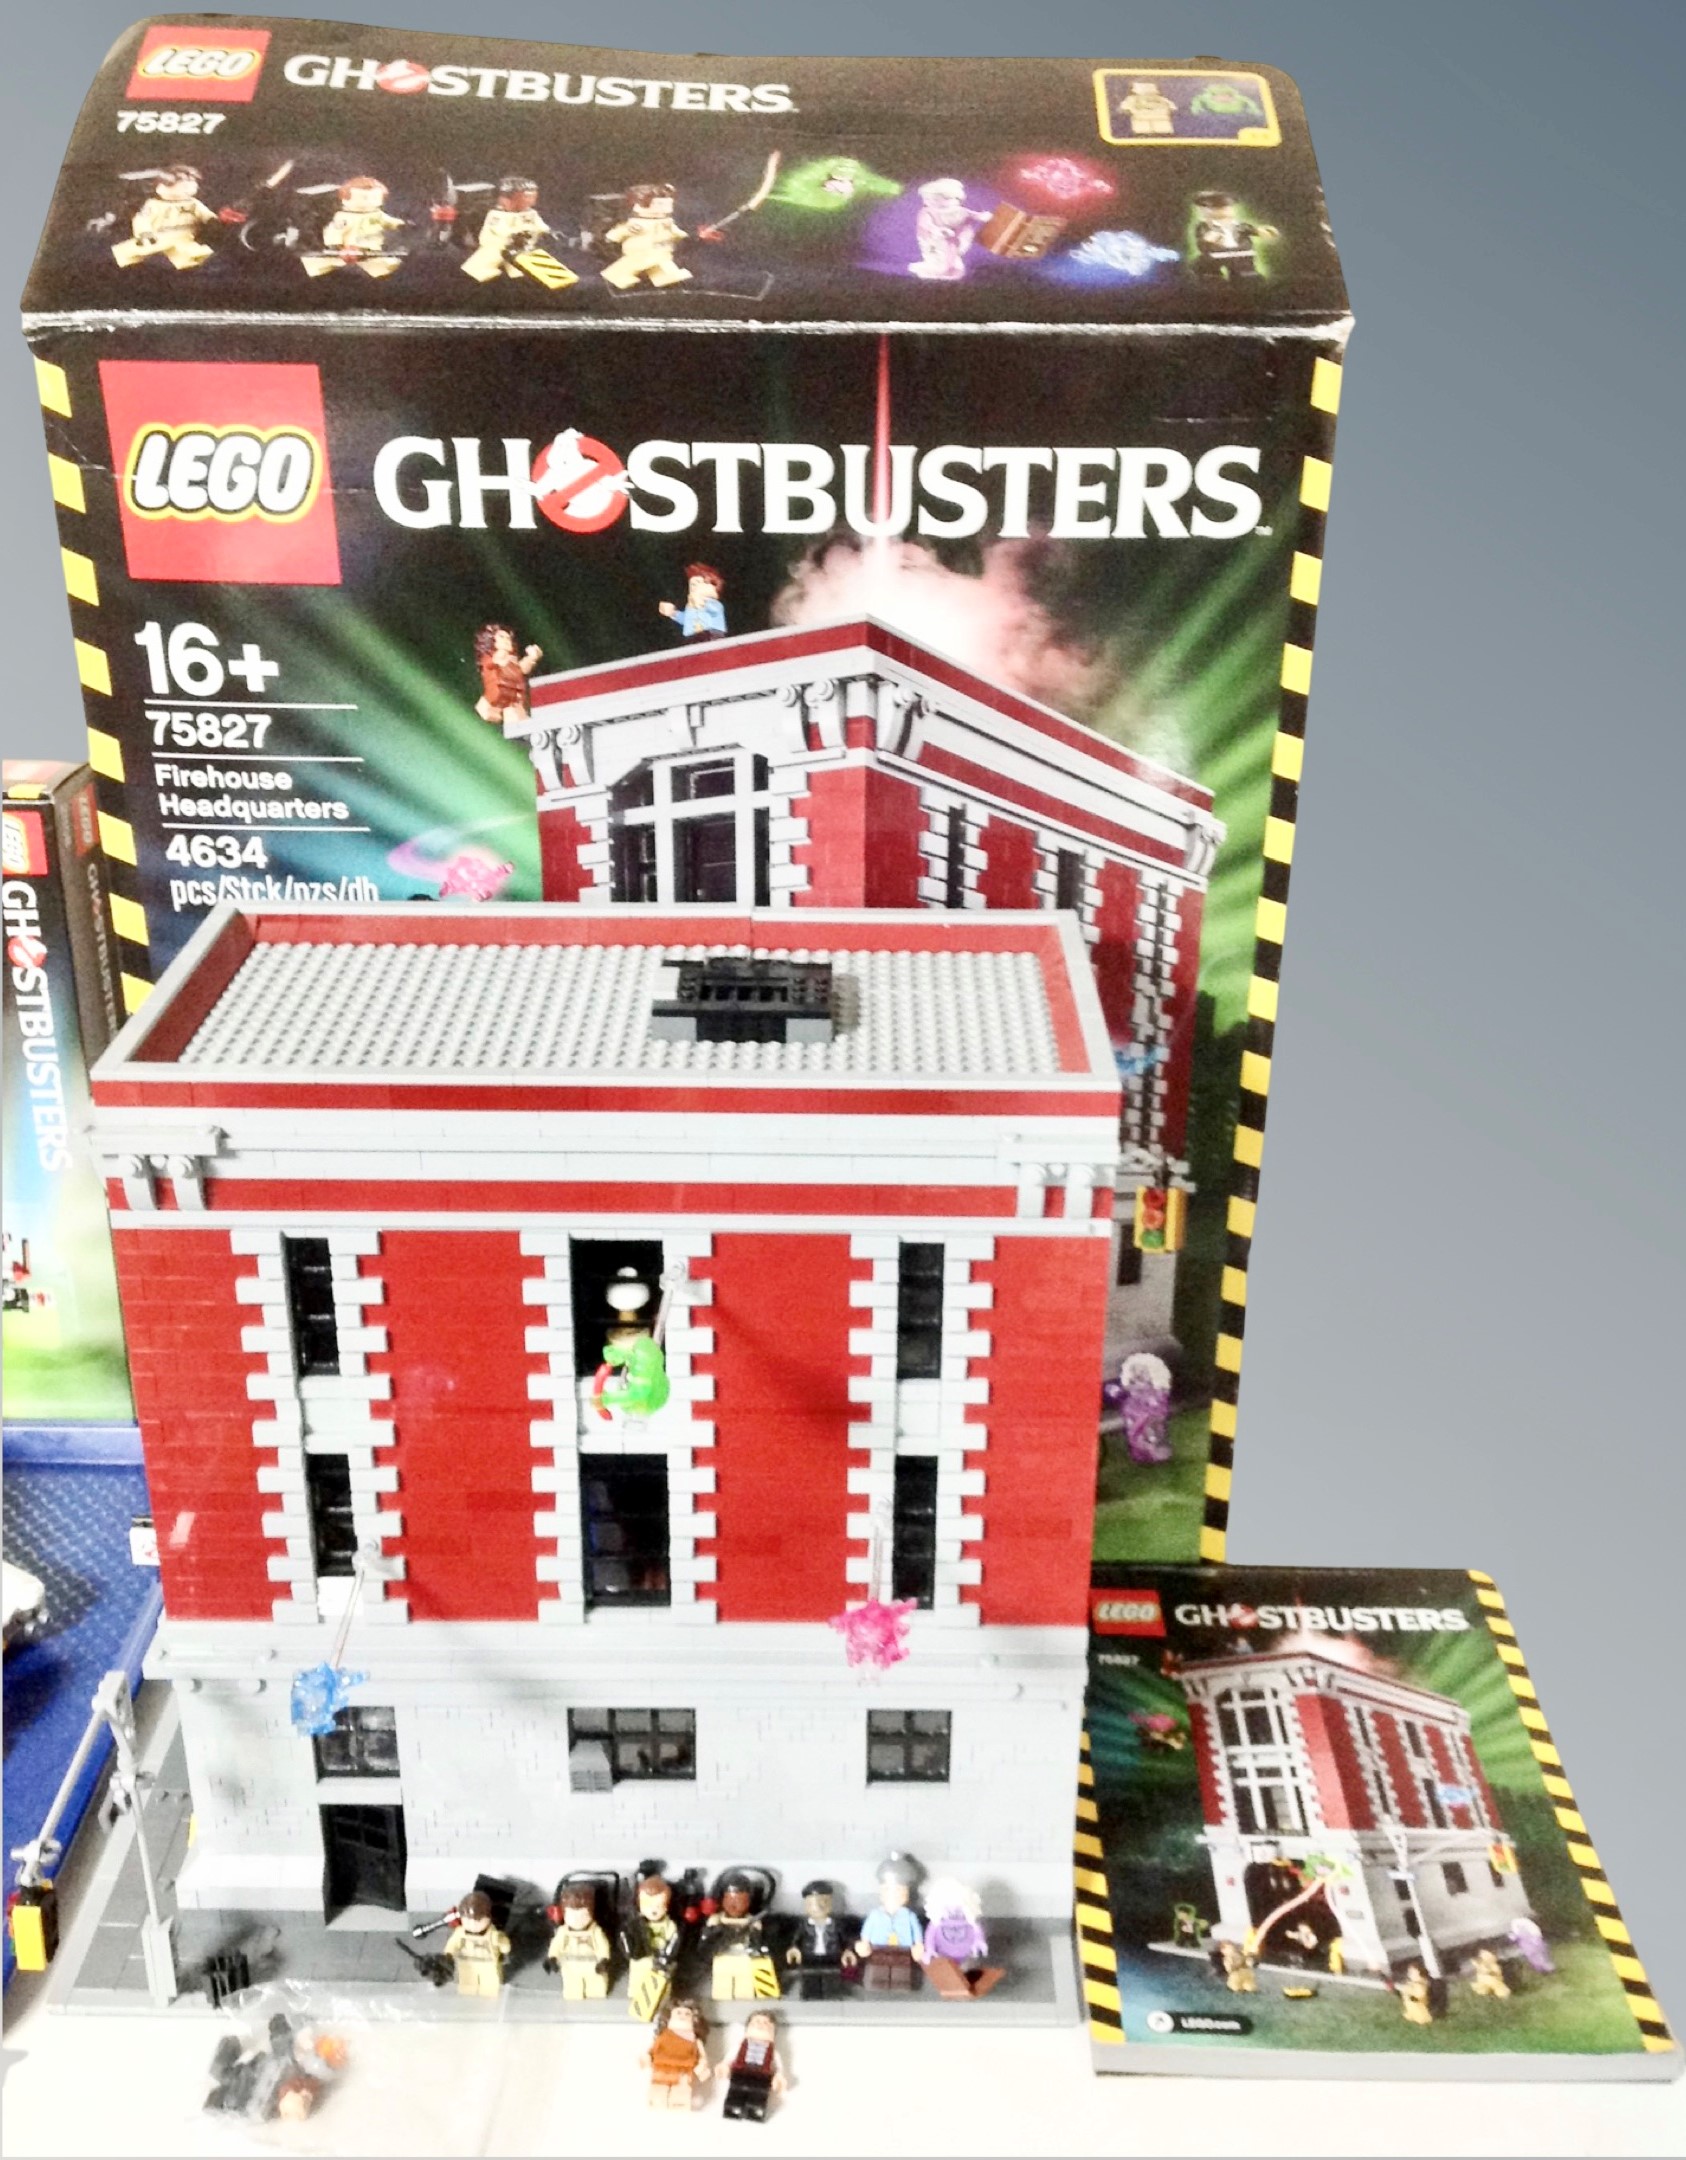 A Lego Ghostbusters 75827 Firehouse head quarters with box and instructions